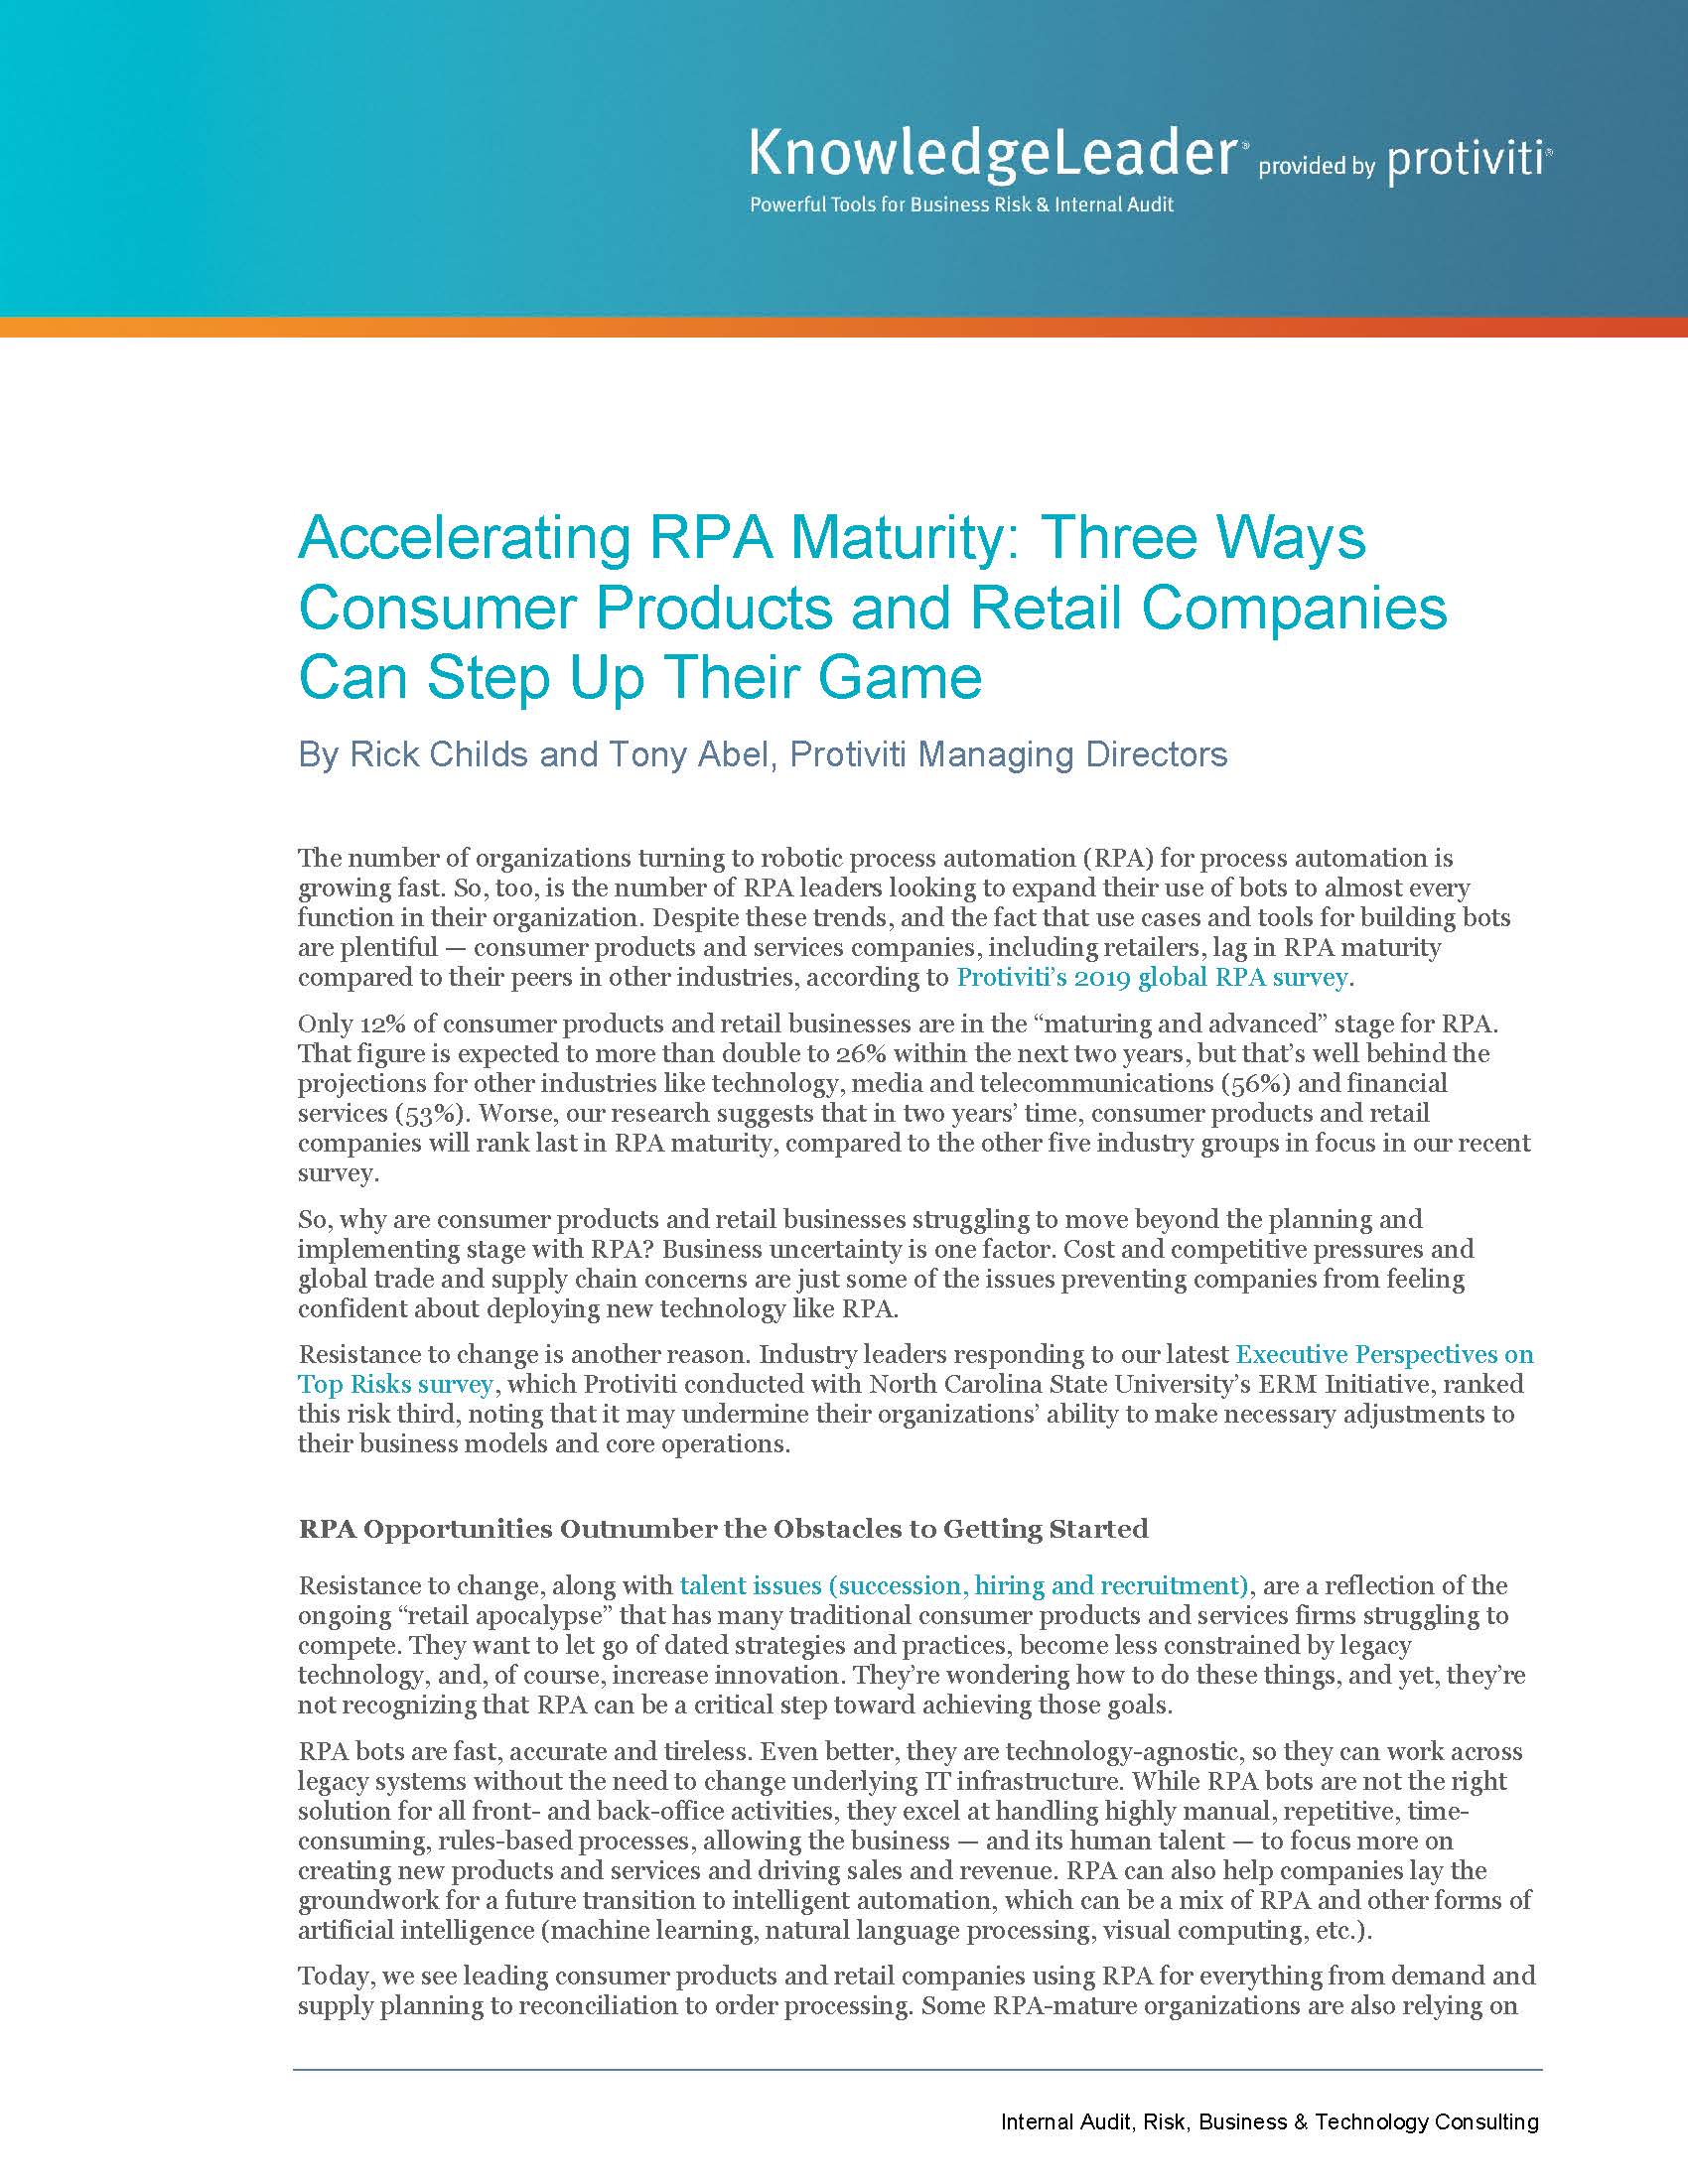 Screenshot of the first page of Accelerating RPA Maturity Three Ways Consumer Products and Retail Companies Can Step Up Their Game